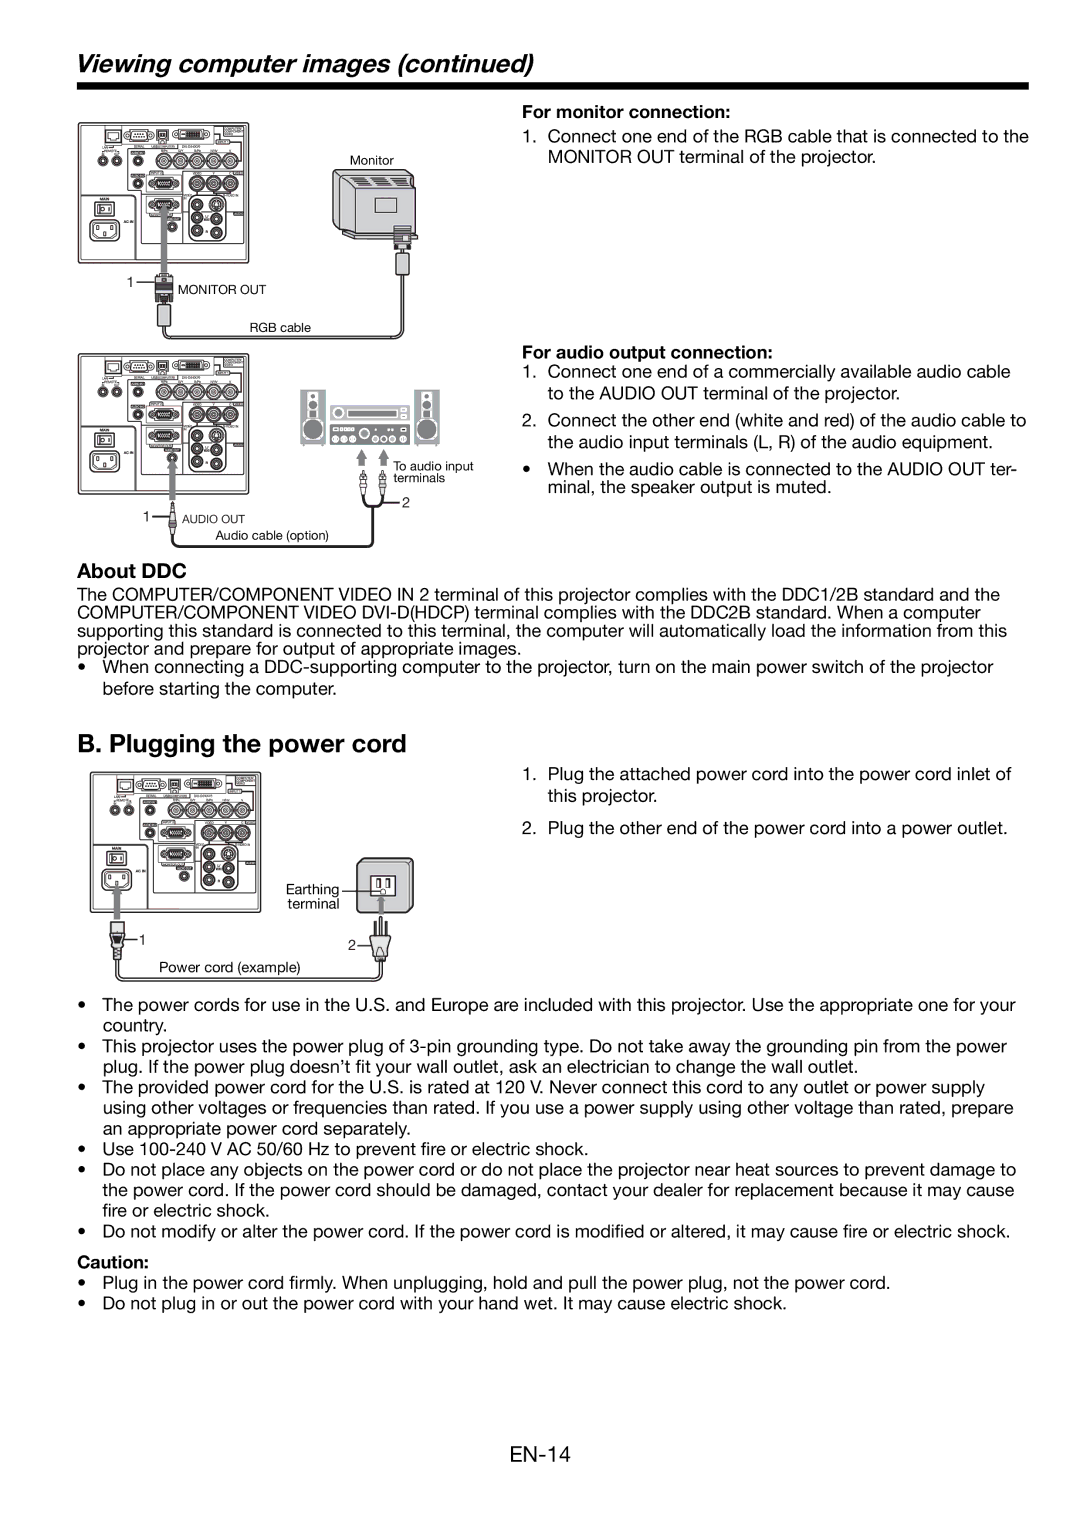 Mitsubishi Electronics FL7000 user manual Viewing computer images, Plugging the power cord, For monitor connection 